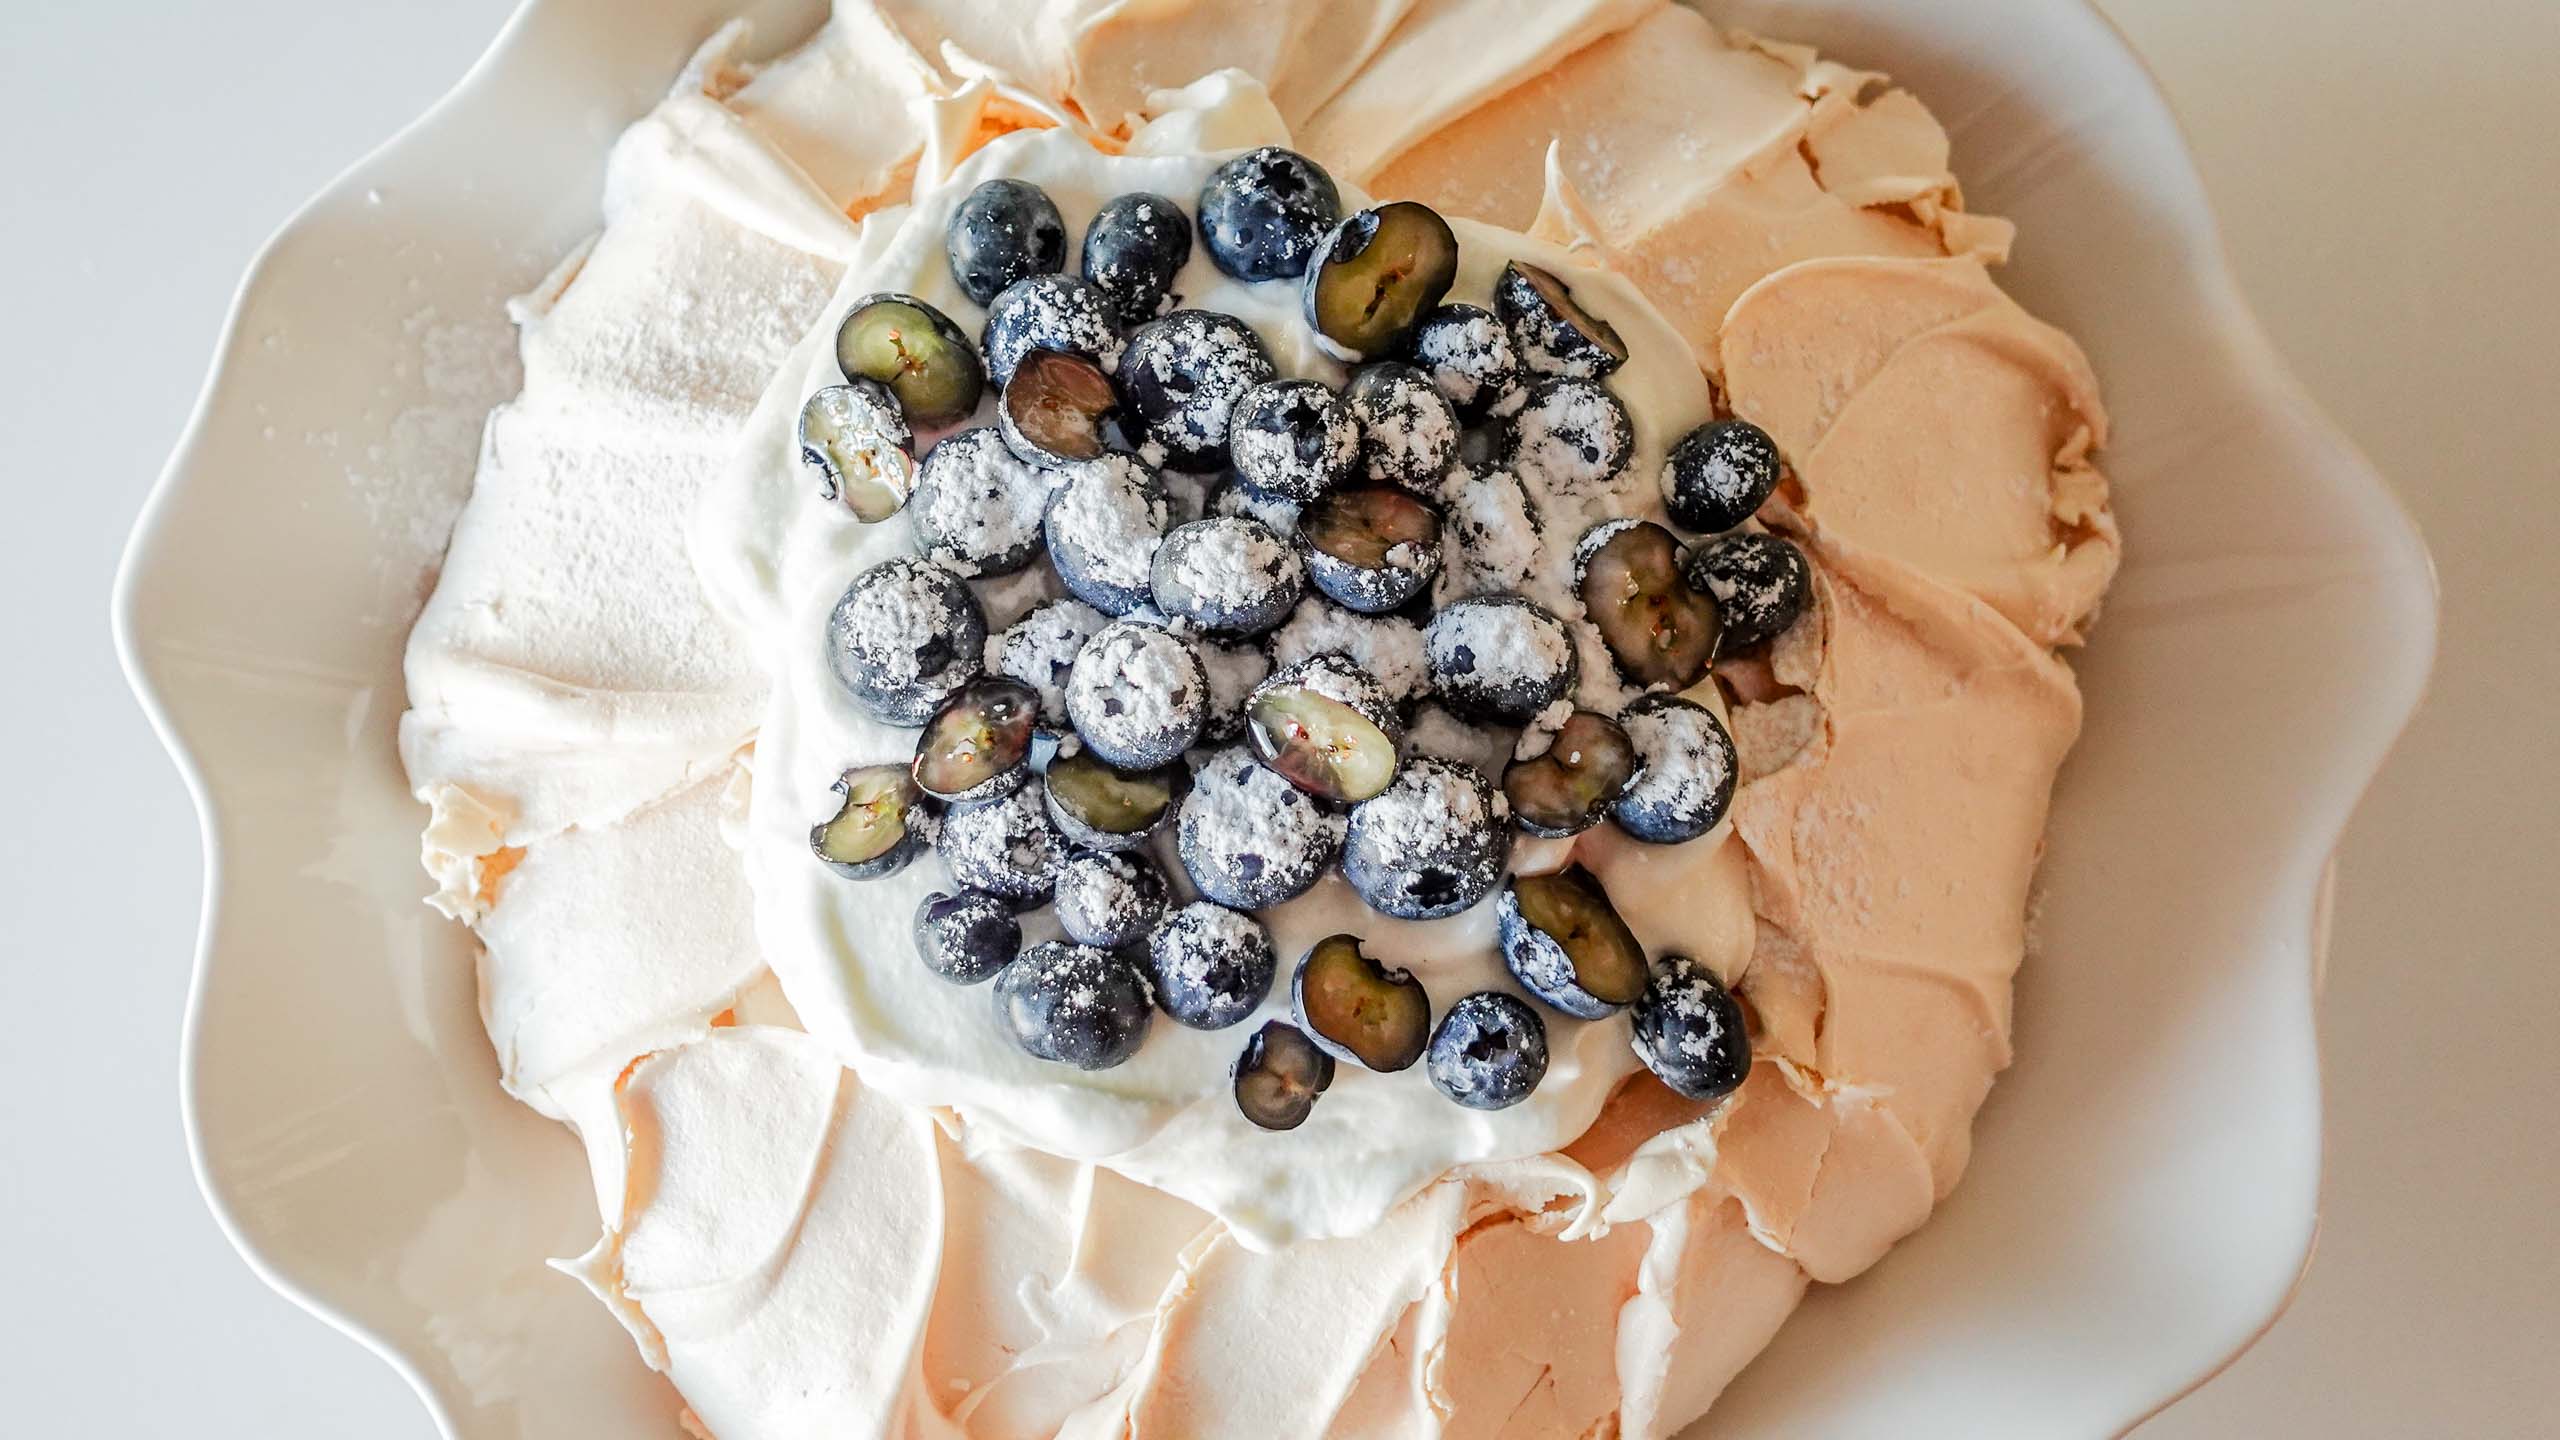 Blueberry pavlova with delicious blueberries on top